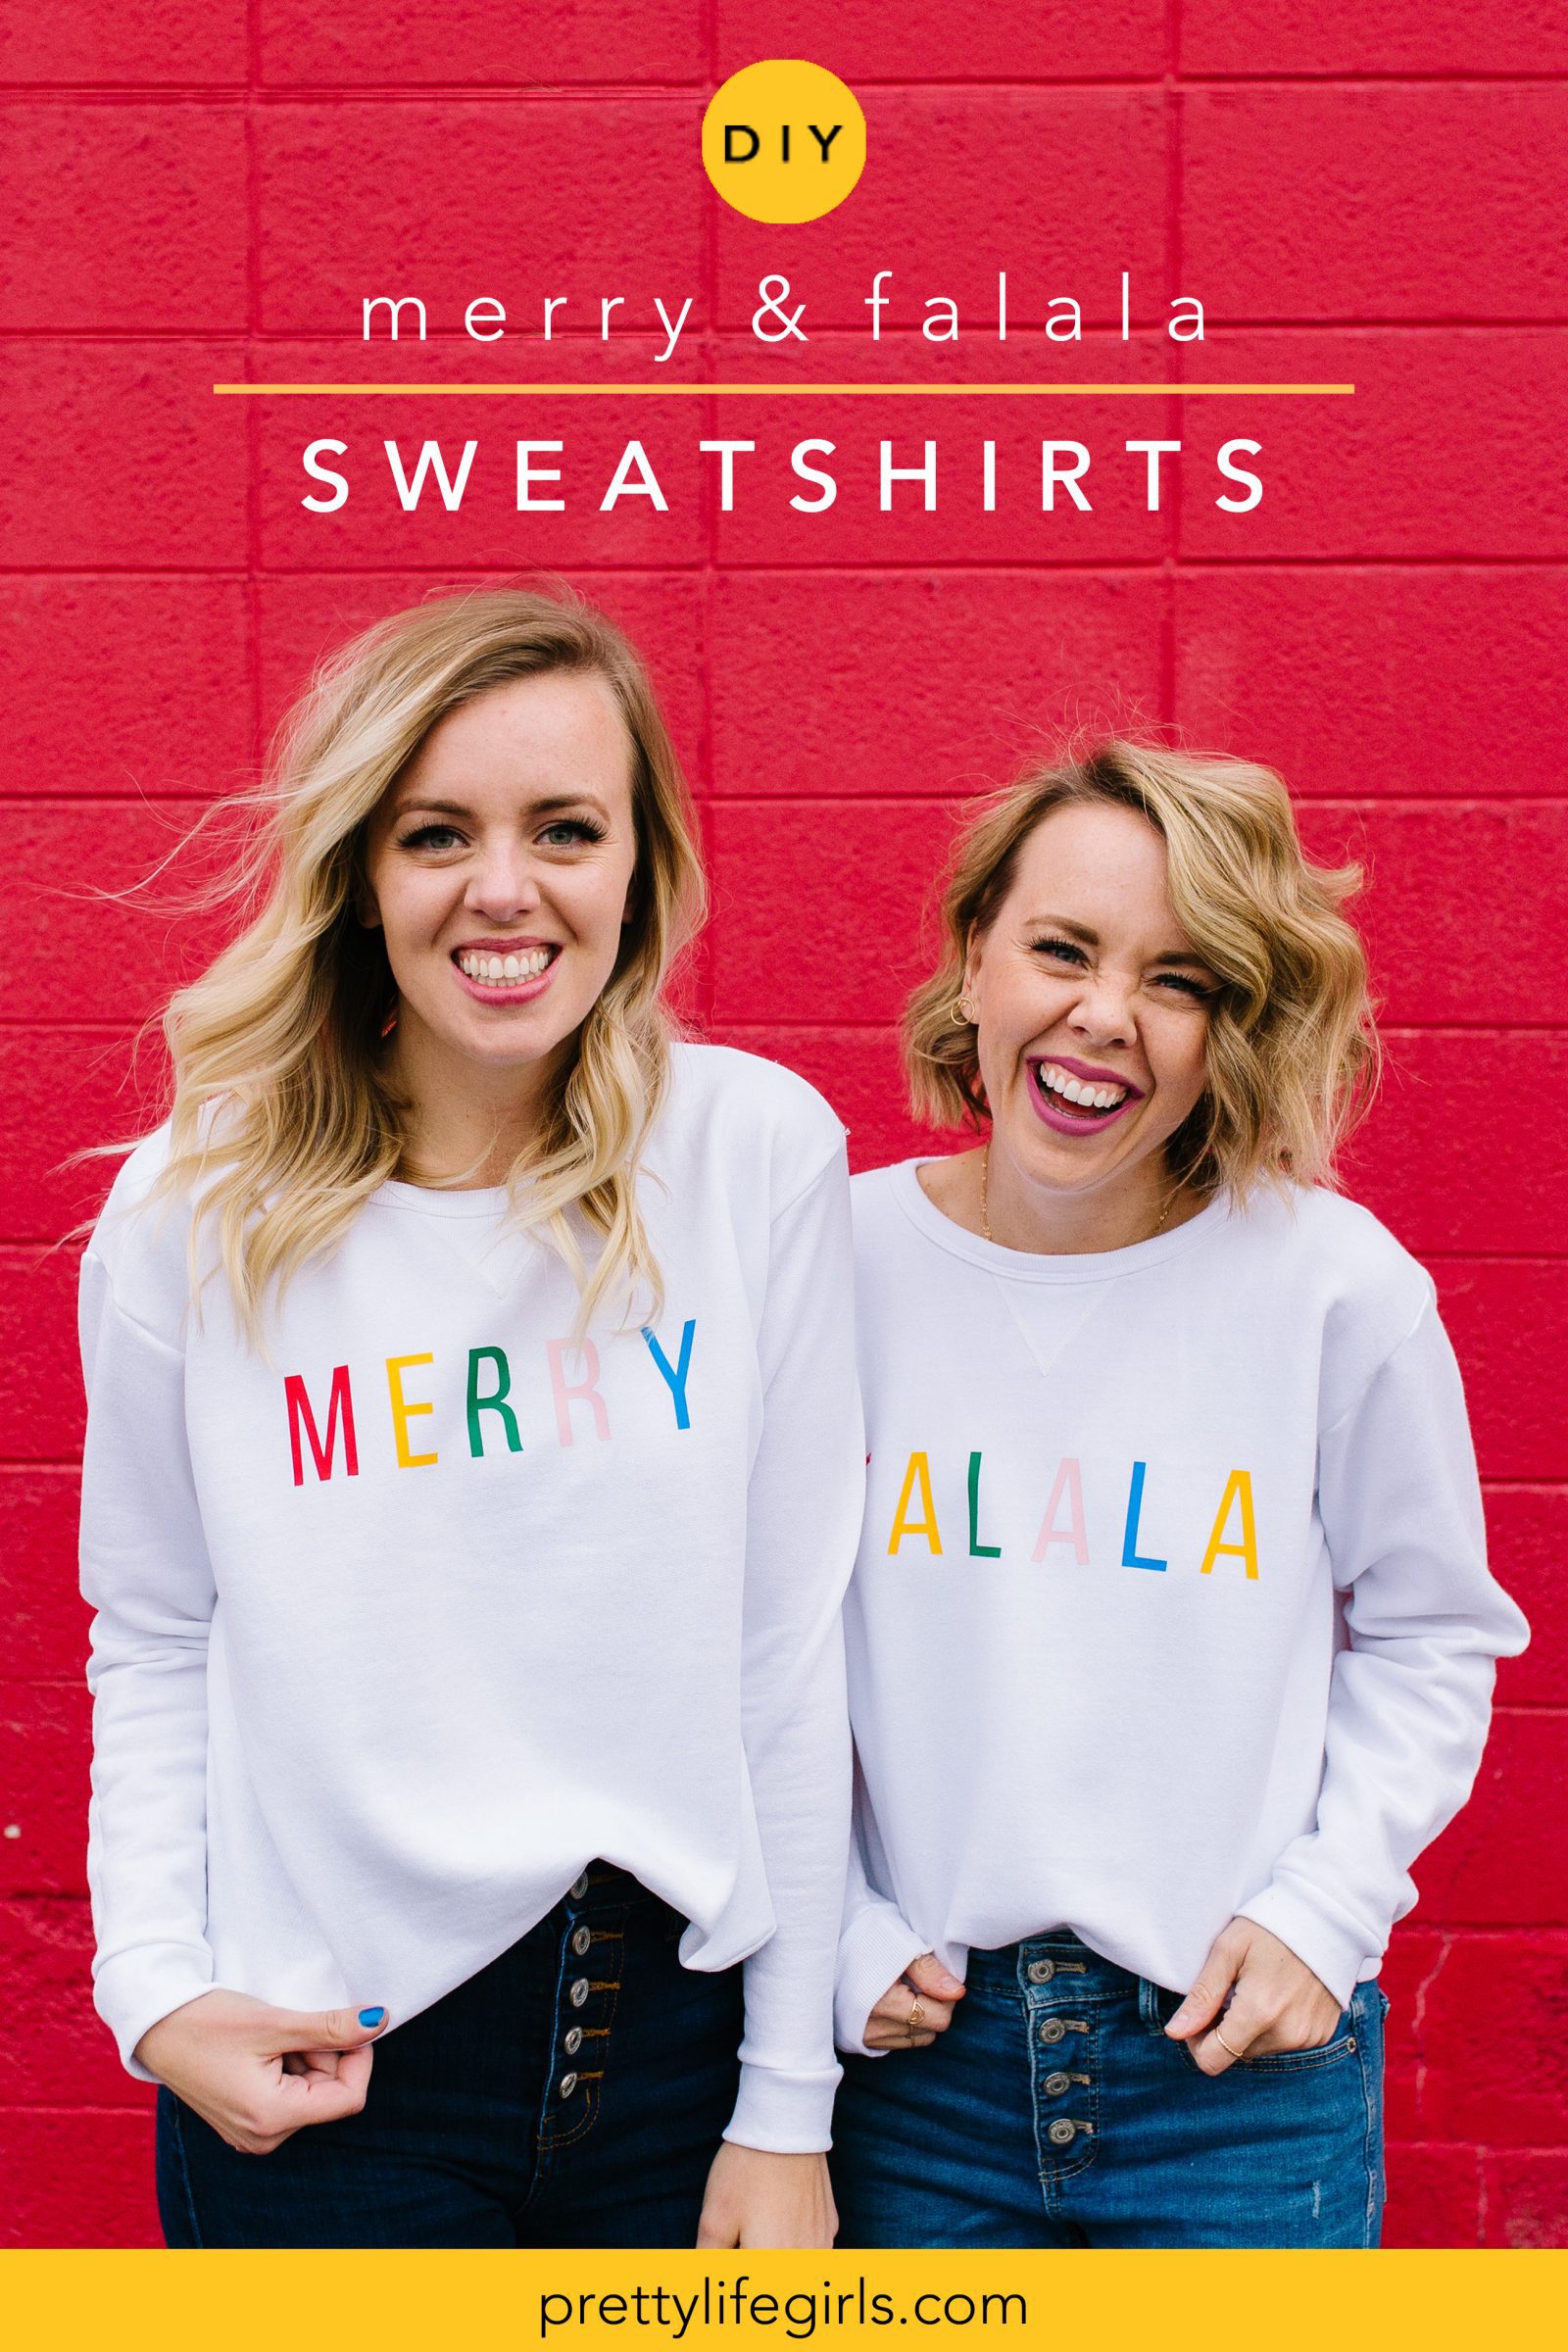 DIY Christmas Sweatshirt with HTV + a tutorial featured by Top US Craft Blog + The Pretty Life Girls